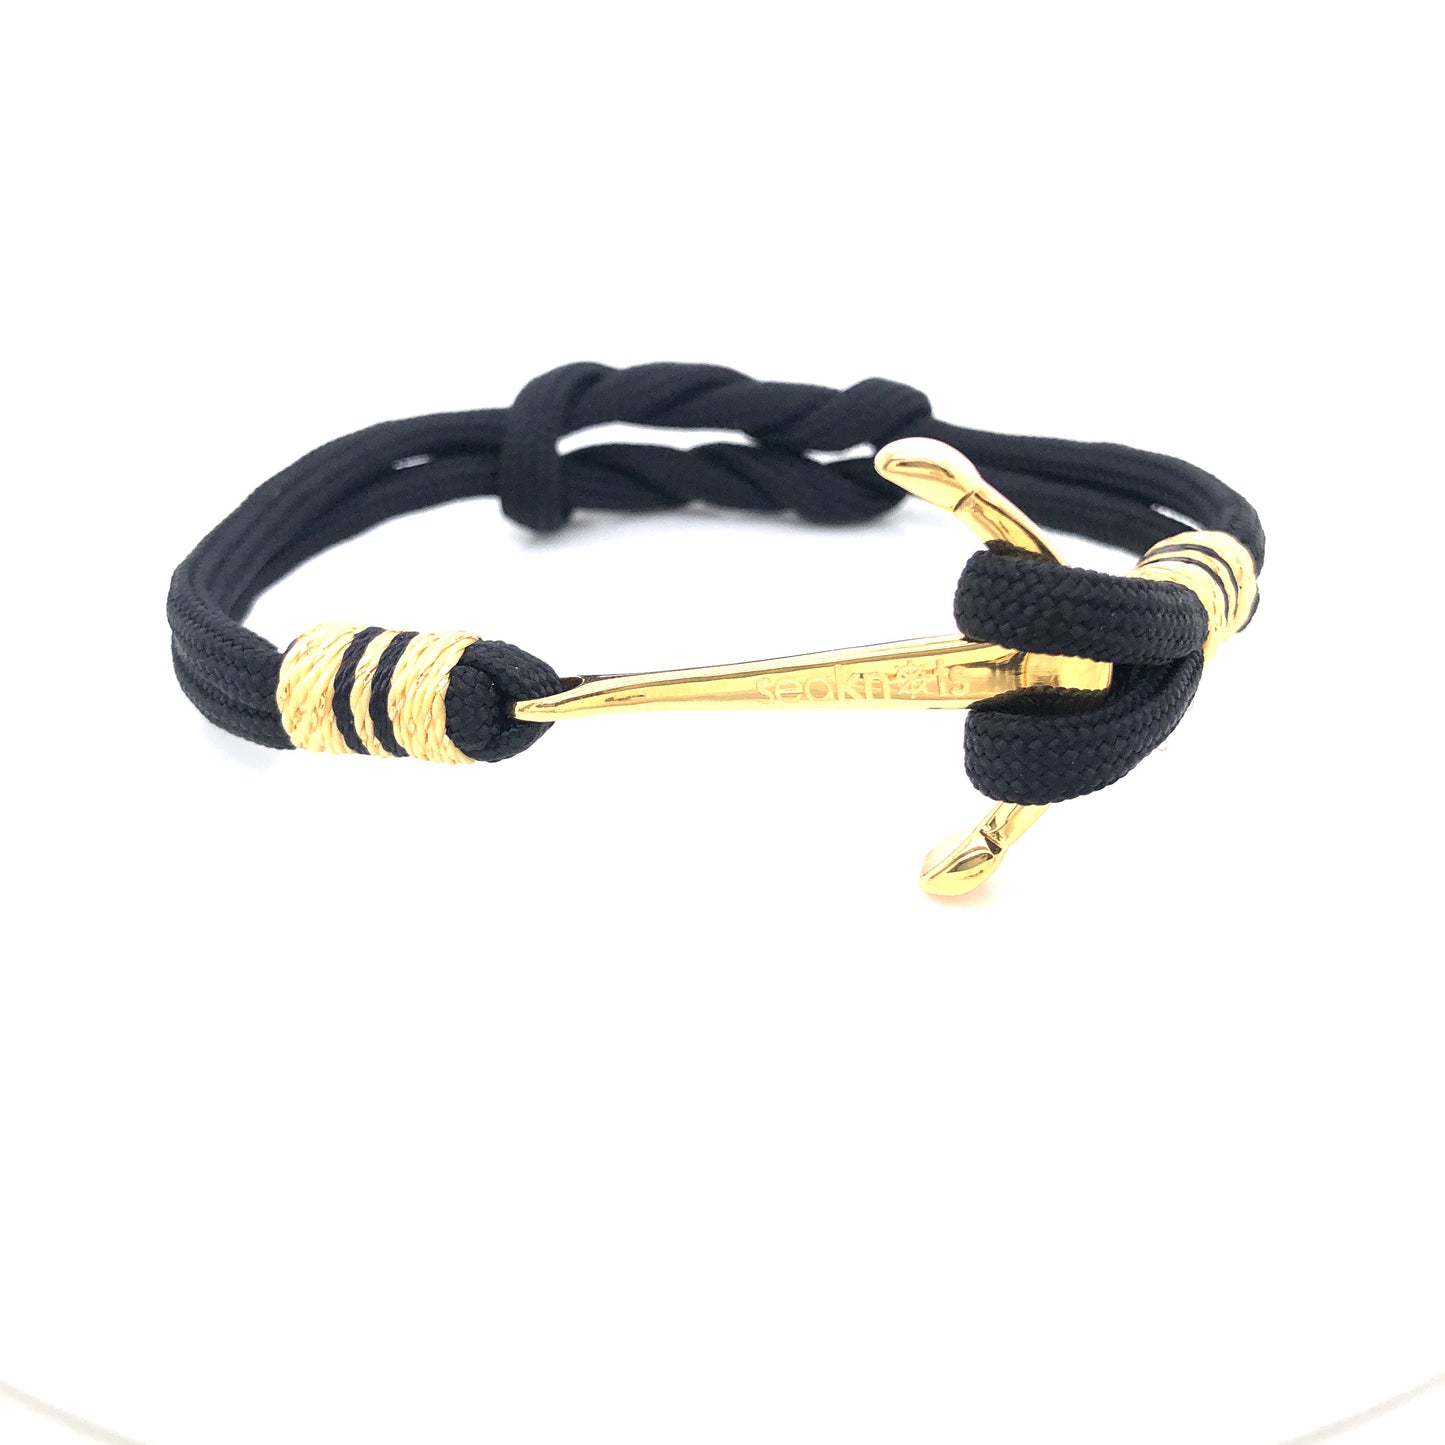 Black Double Cord with Gold Anchor Bracelet | Seaknots | Luby 